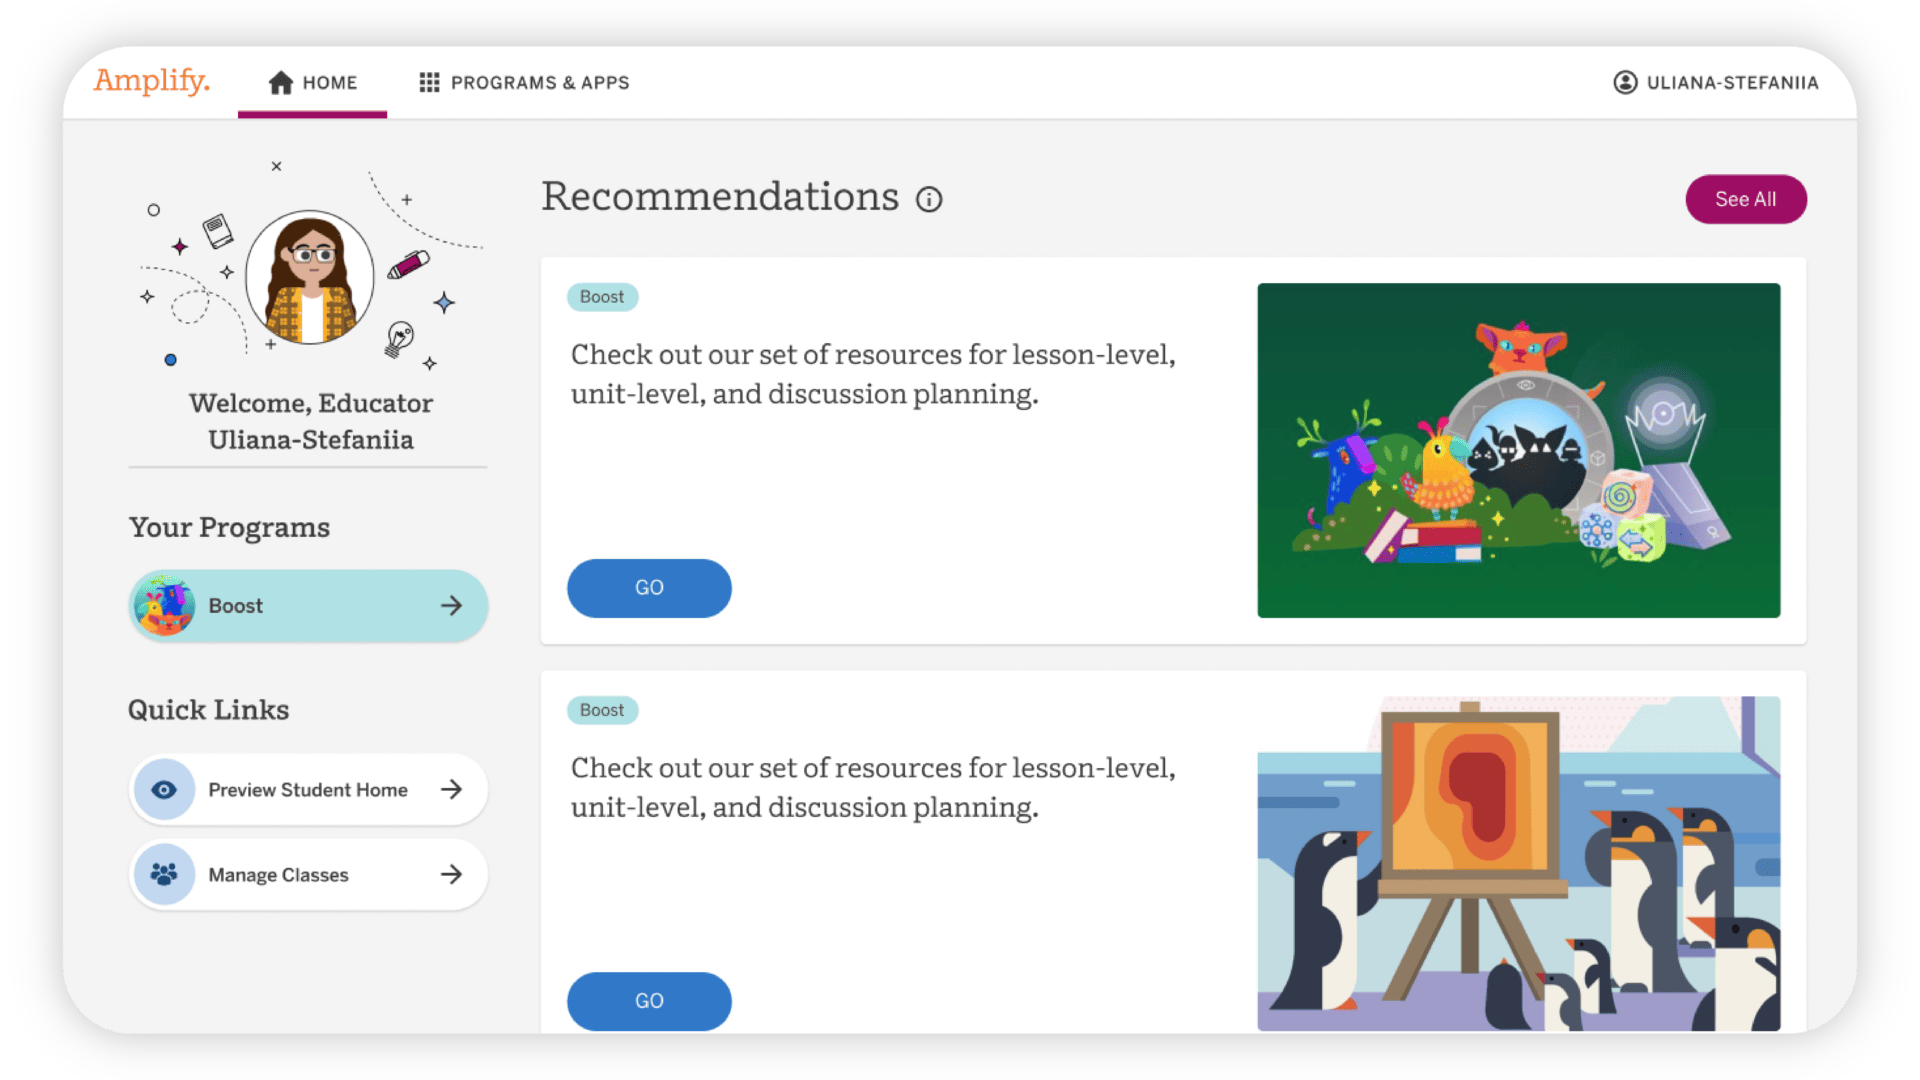 A digital educational platform interface featuring user uliana-stefania, two 'boost reading' program tiles displaying children’s educational content focused on reading skills, and quick access links on the left.